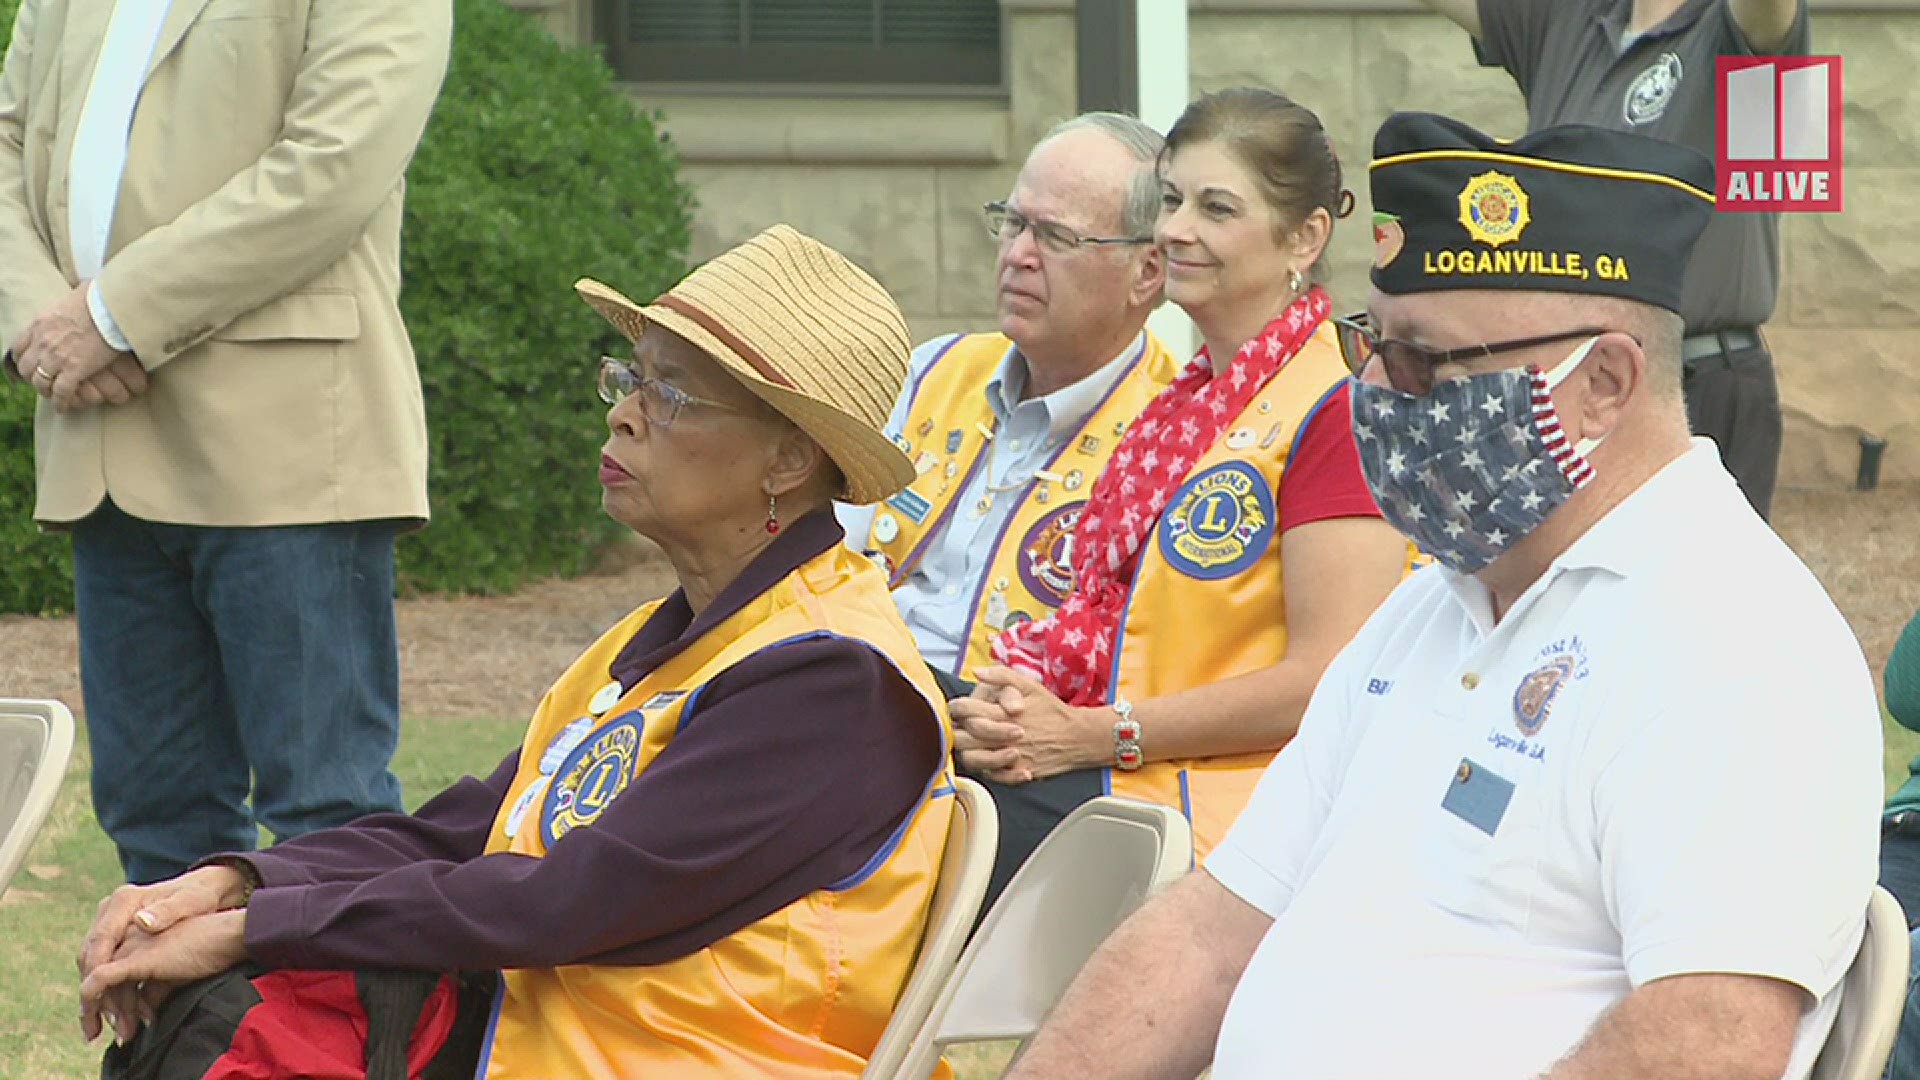 Americans across metro Atlanta are pausing on this Memorial Day to remember the fallen from the armed forces throughout this country's history.